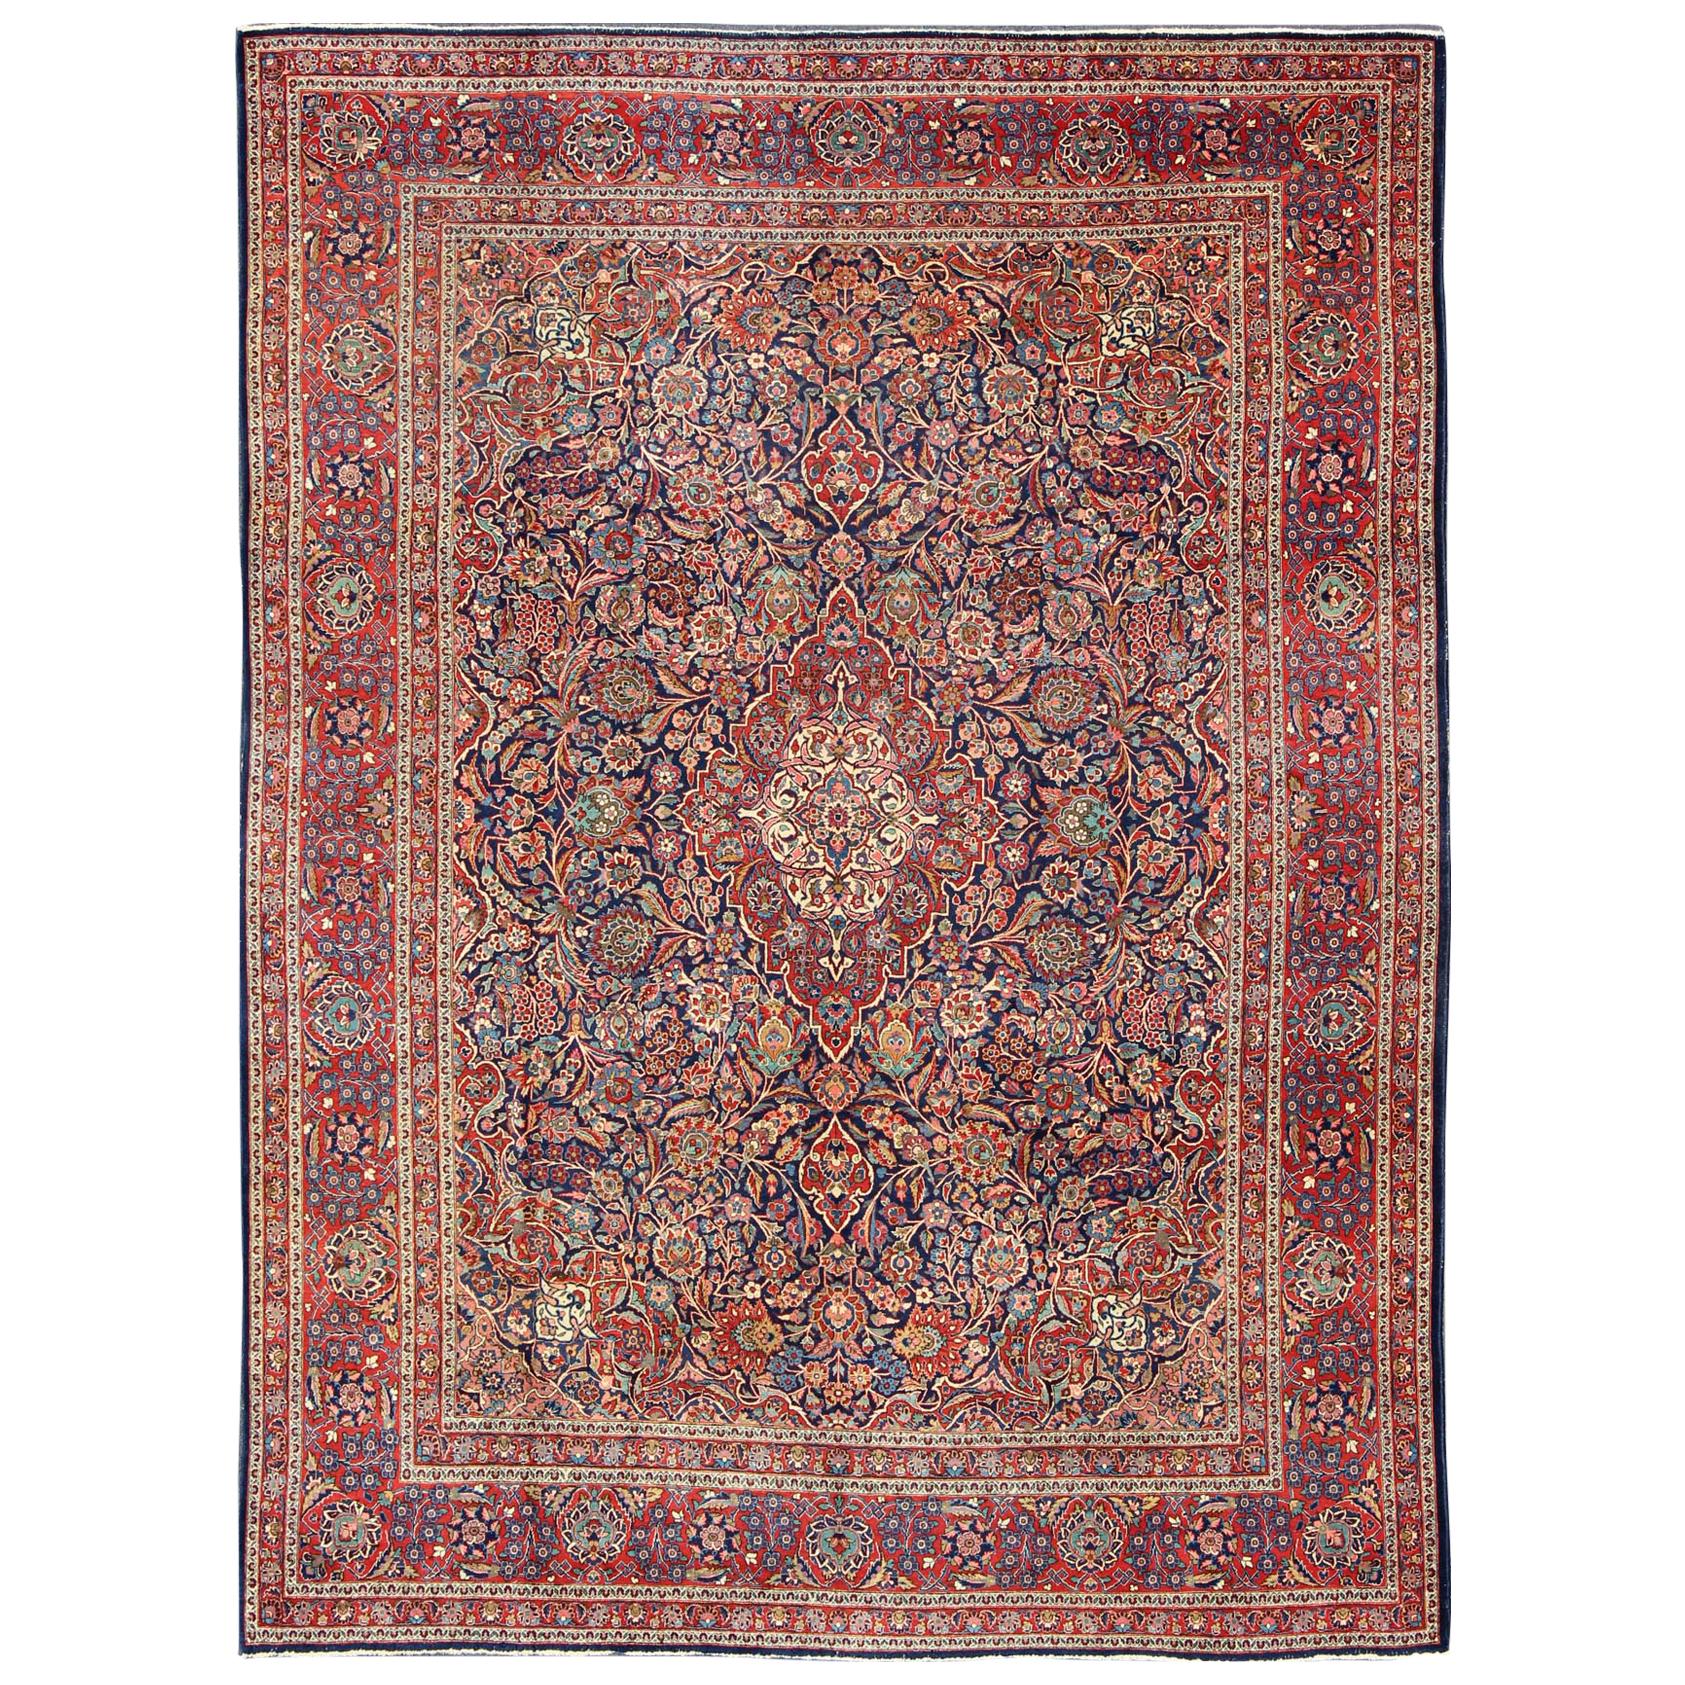 Antique Persian Fine Manchester Classic Kashan rug with Medallion Design